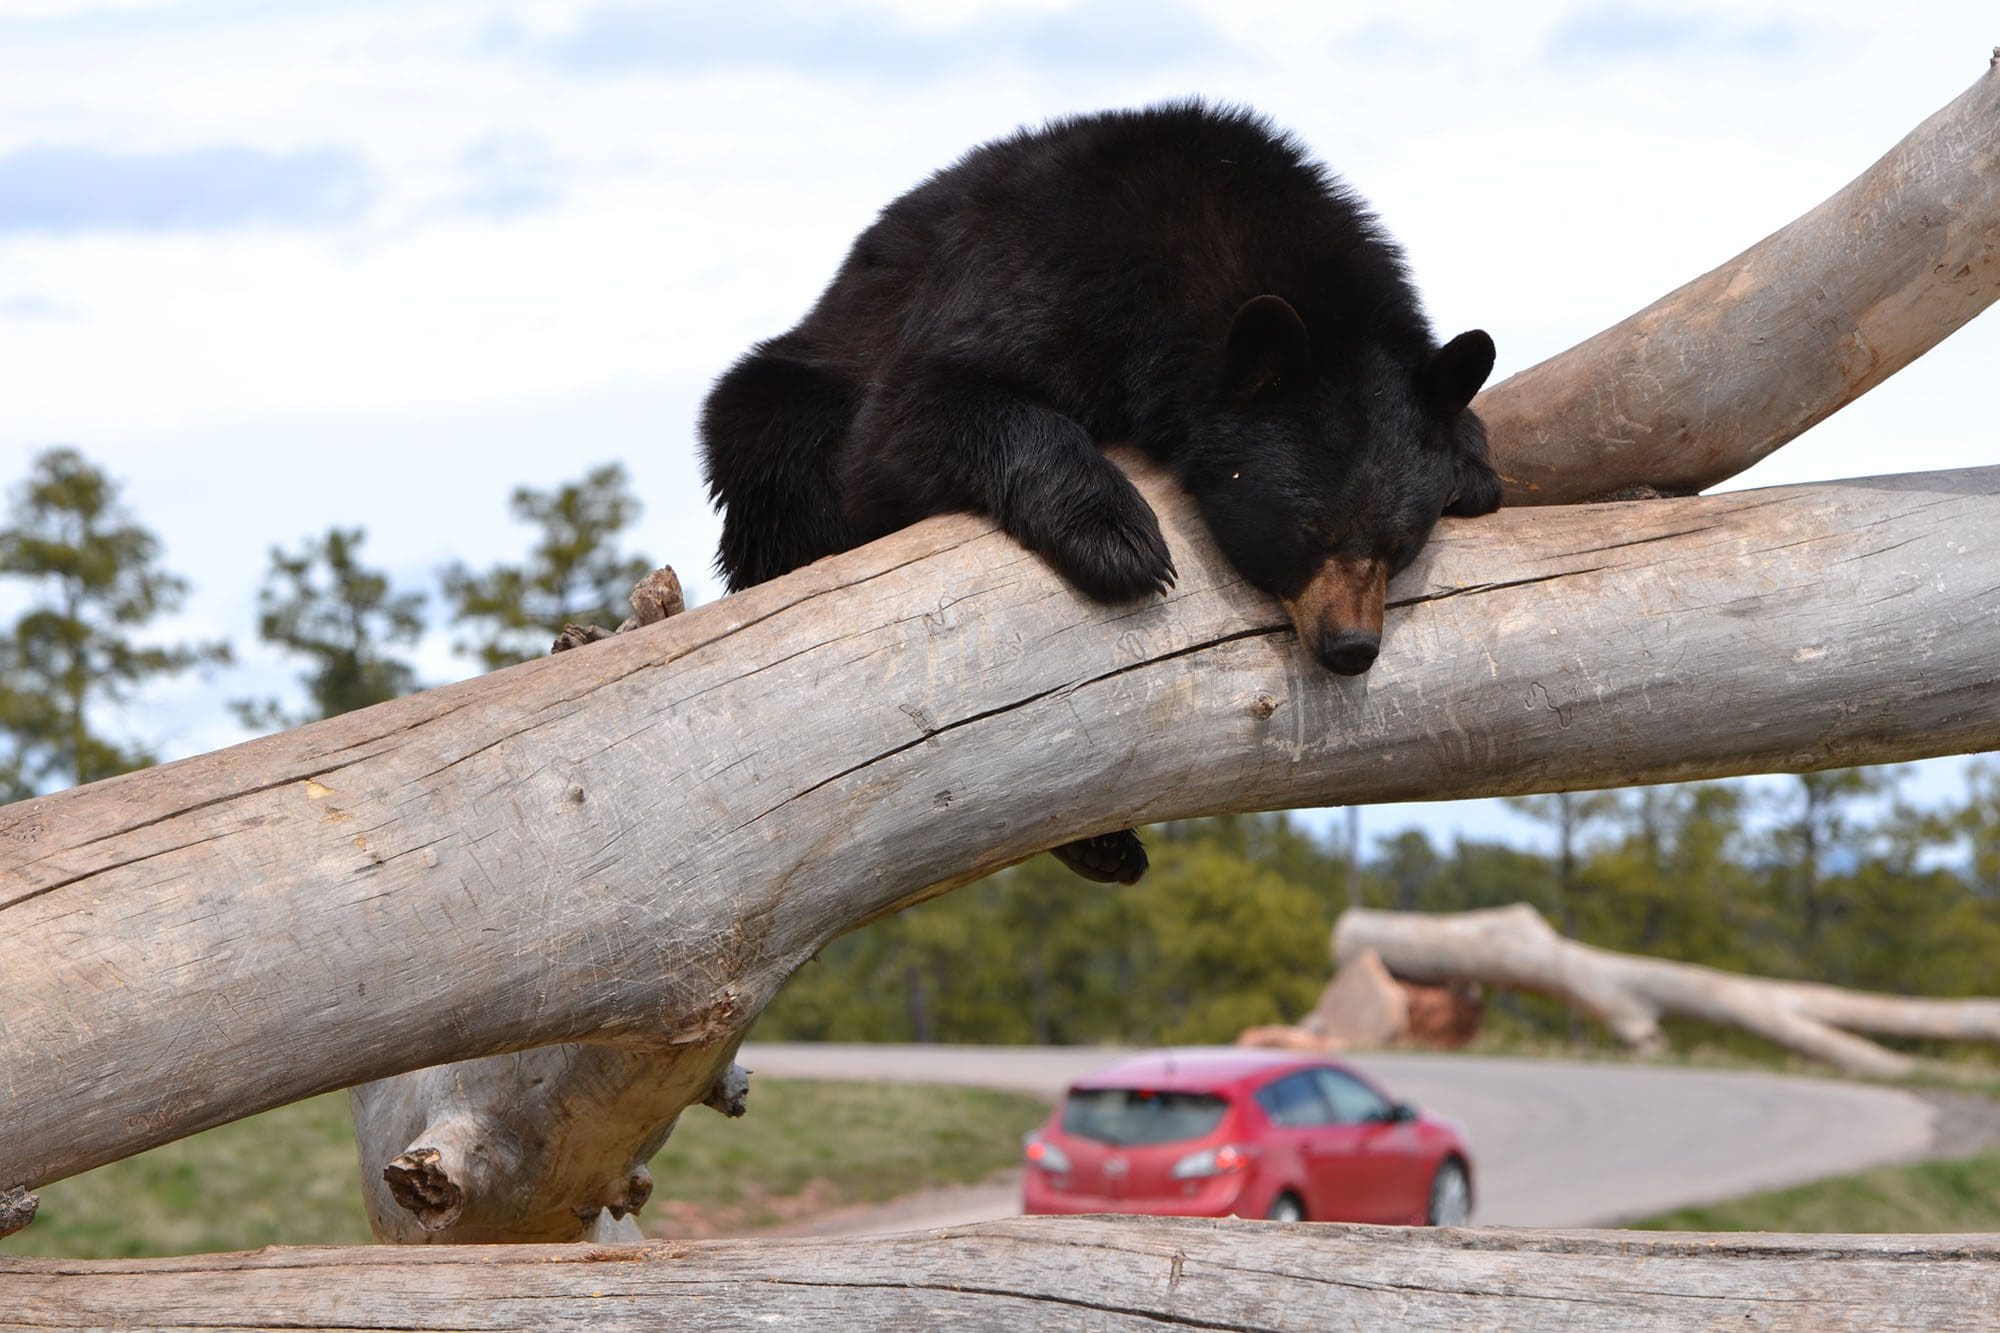 bear laying on tree trunk with red car